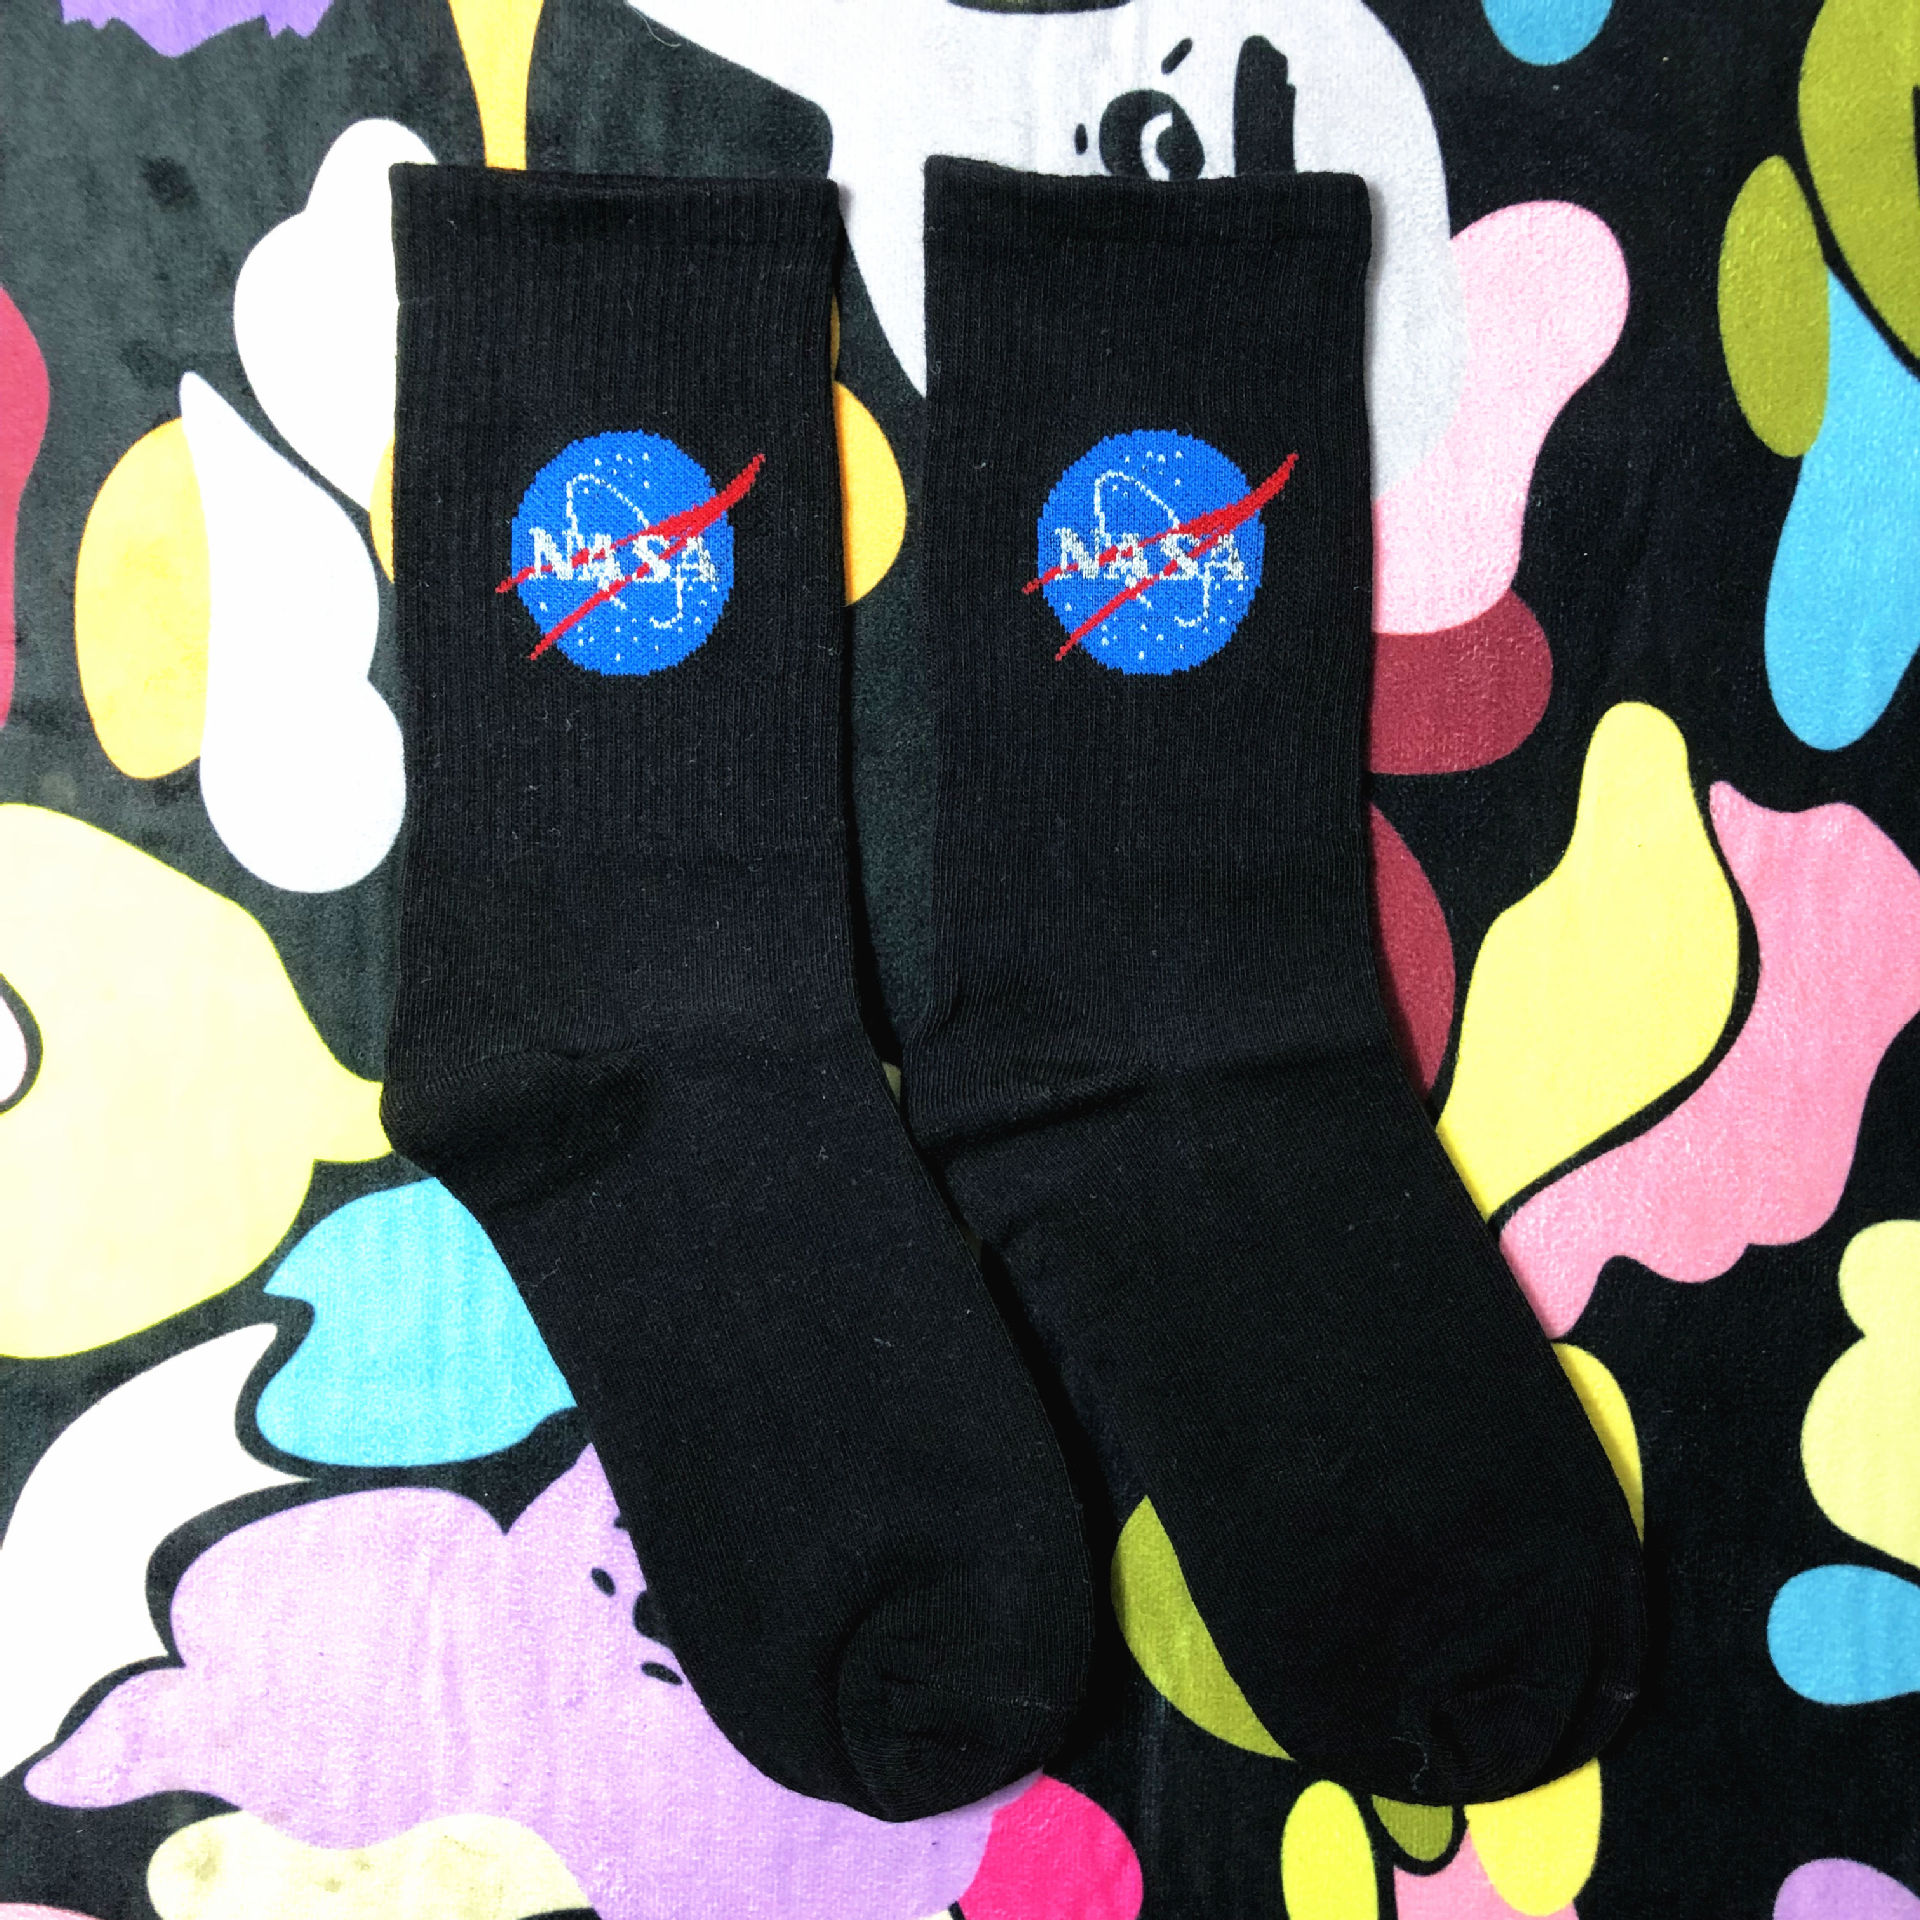 US NASA Astronaut Tide Series Of Street Signs Letter Lovers Wild Cotton Sports Socks